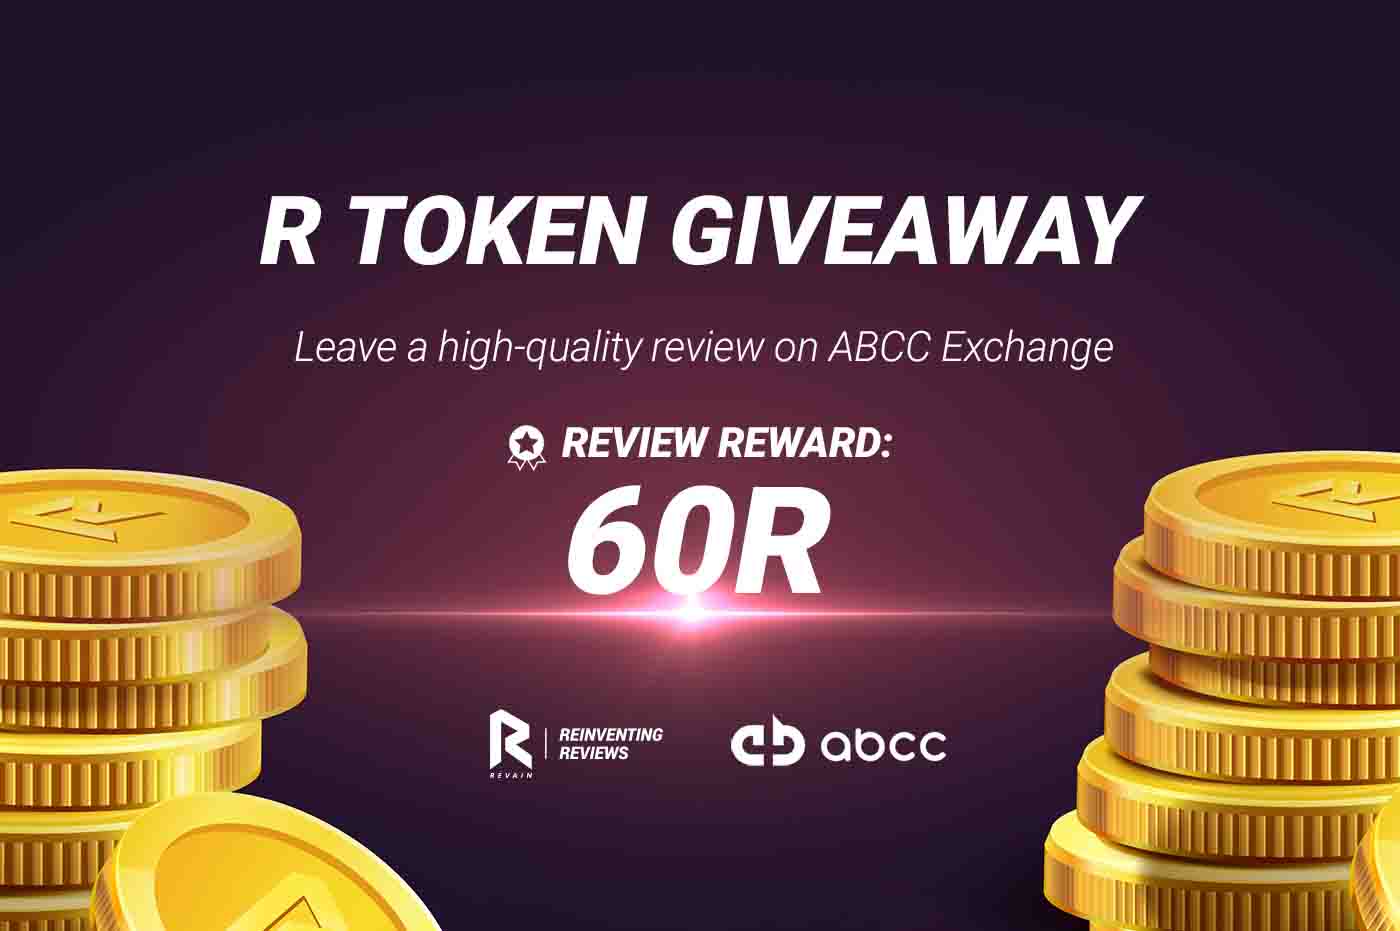 Article New GIVEAWAY is here. 60 R tokens for writing a high-quality review. Join!